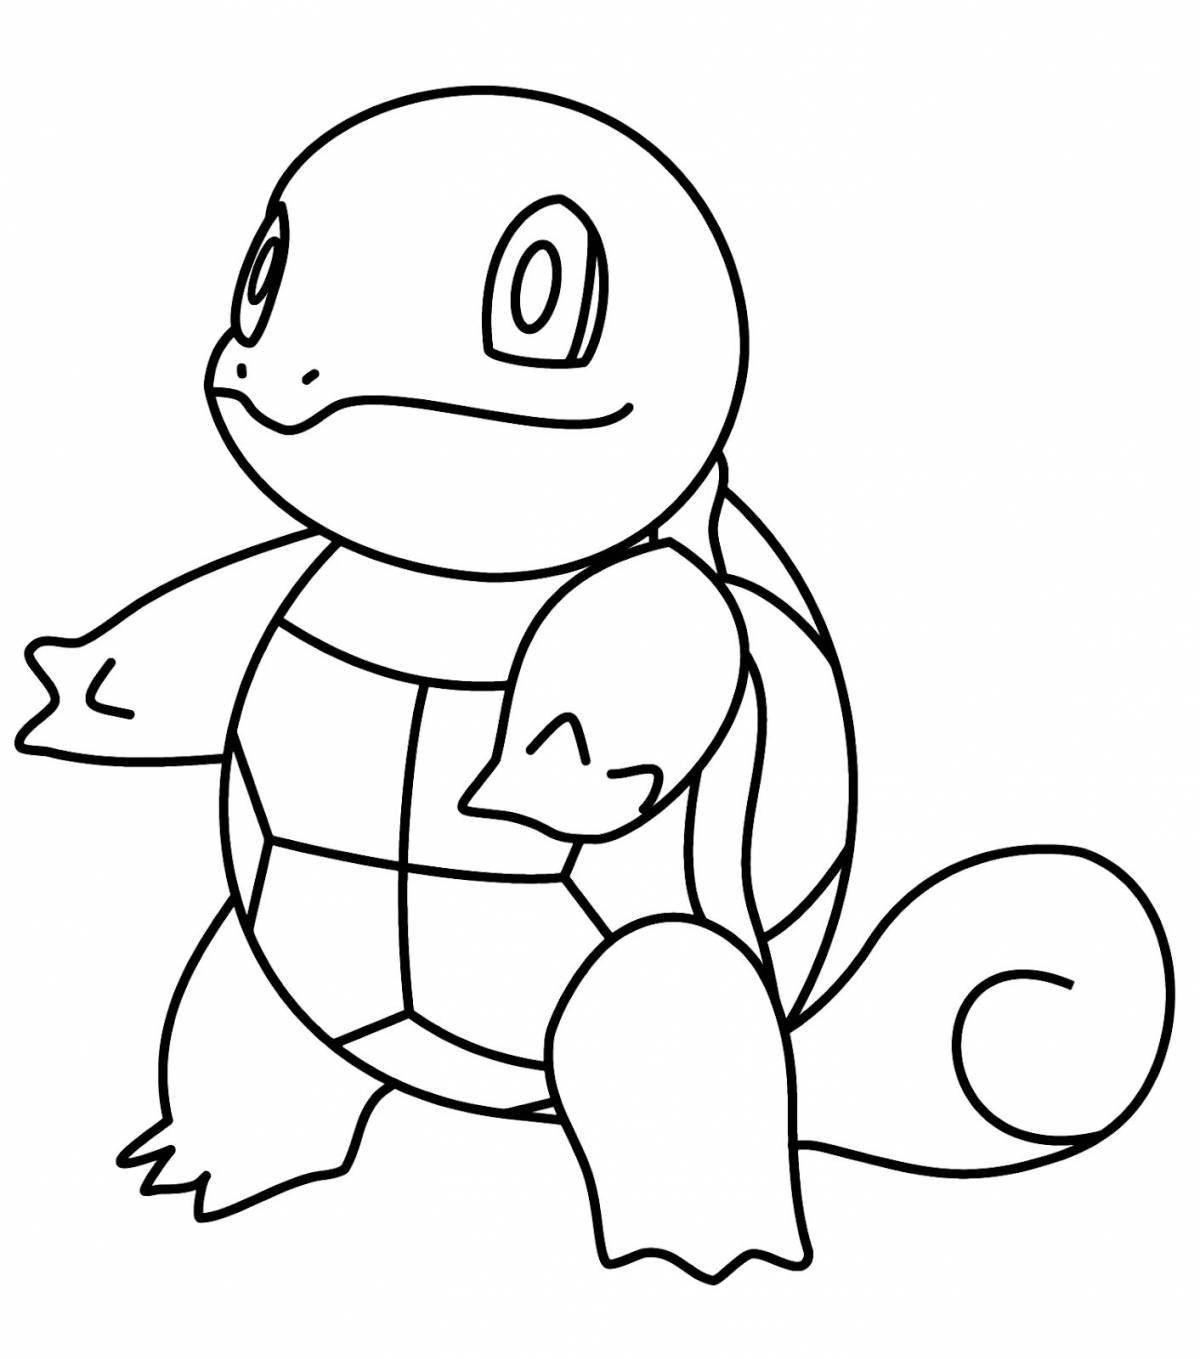 Coloring live squirtle pokemon